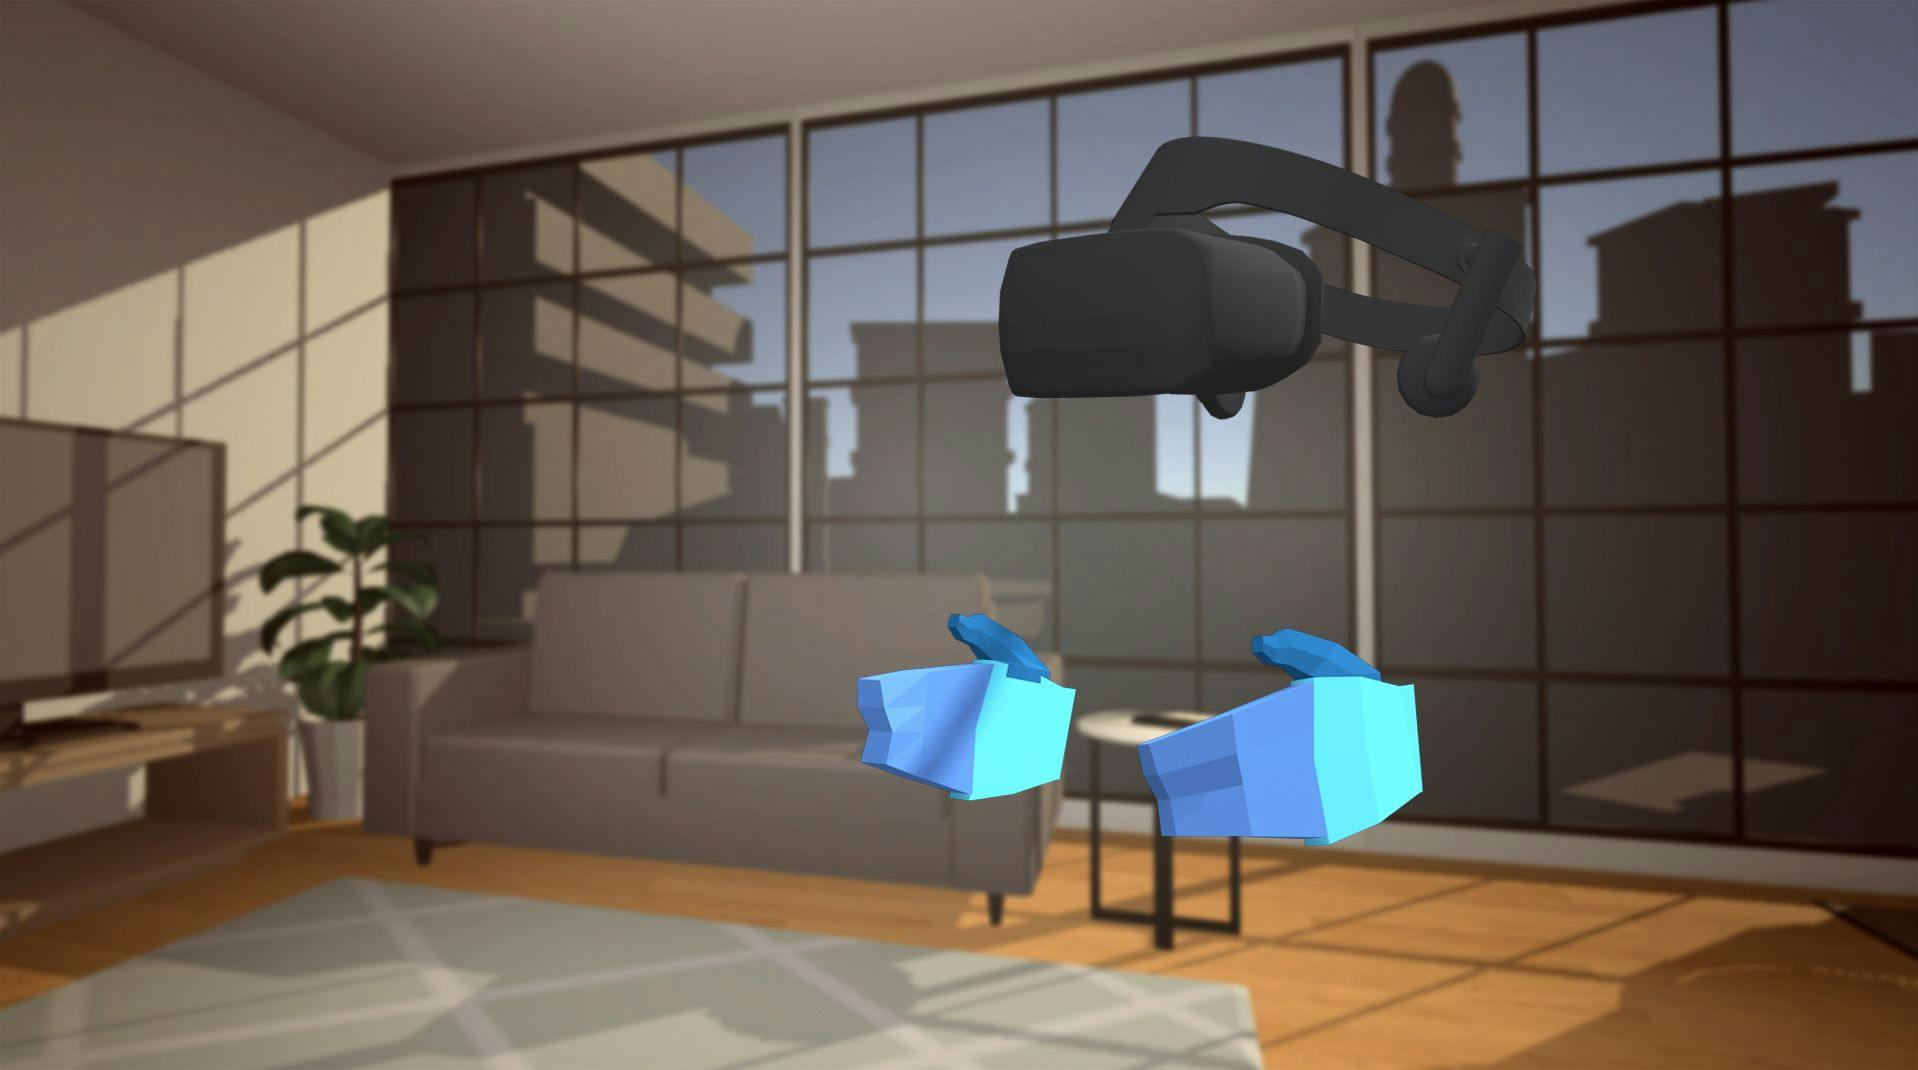 Representative image for the “Create with VR” Unity Learn course